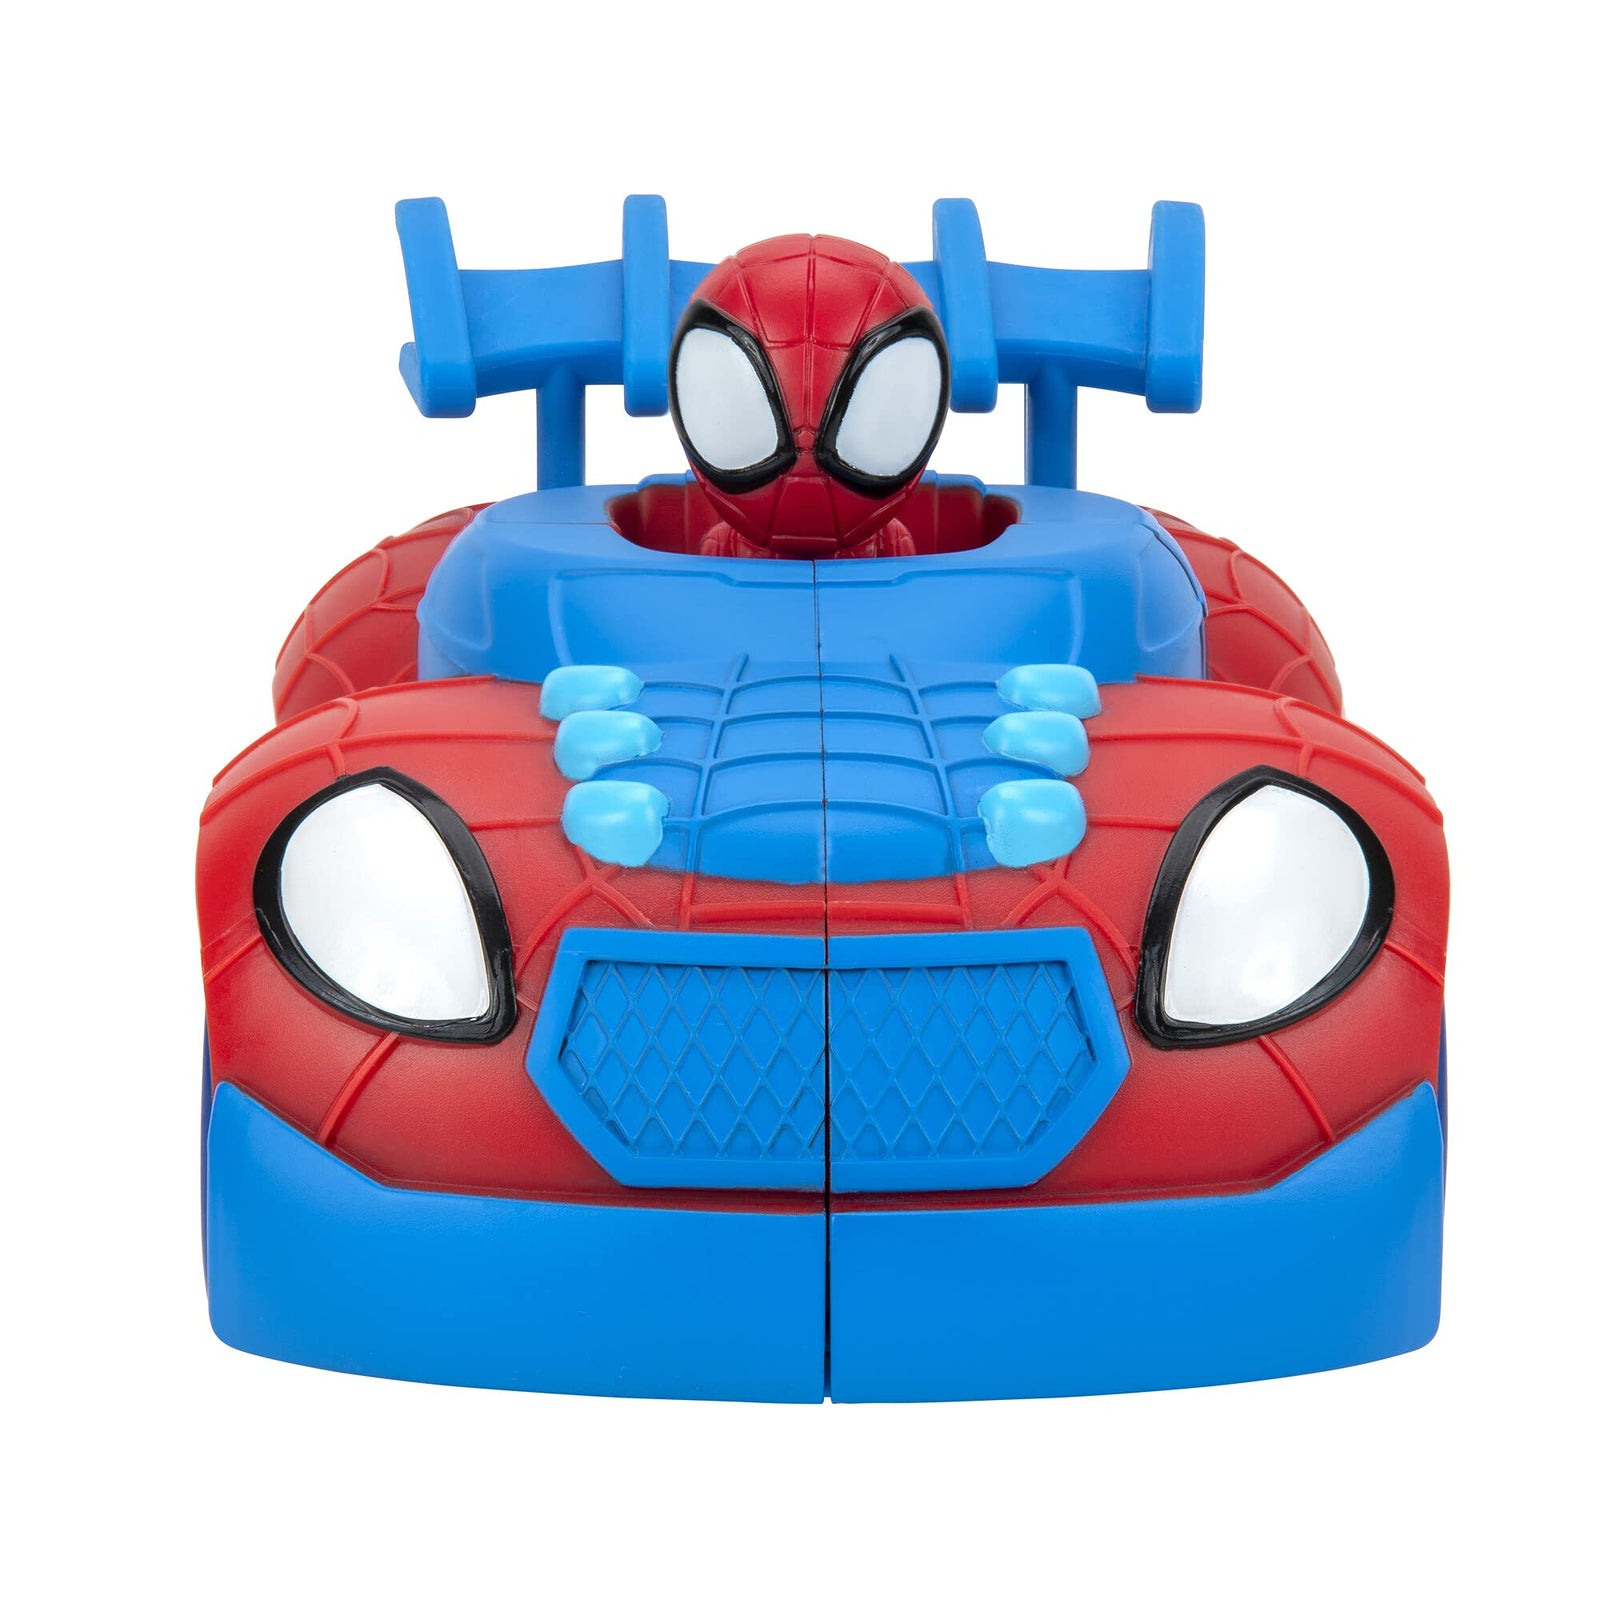 Spidey and His Amazing Friends 2 n 1 Web Strike Feature Vehicle - Must-Have Toy for All Fans